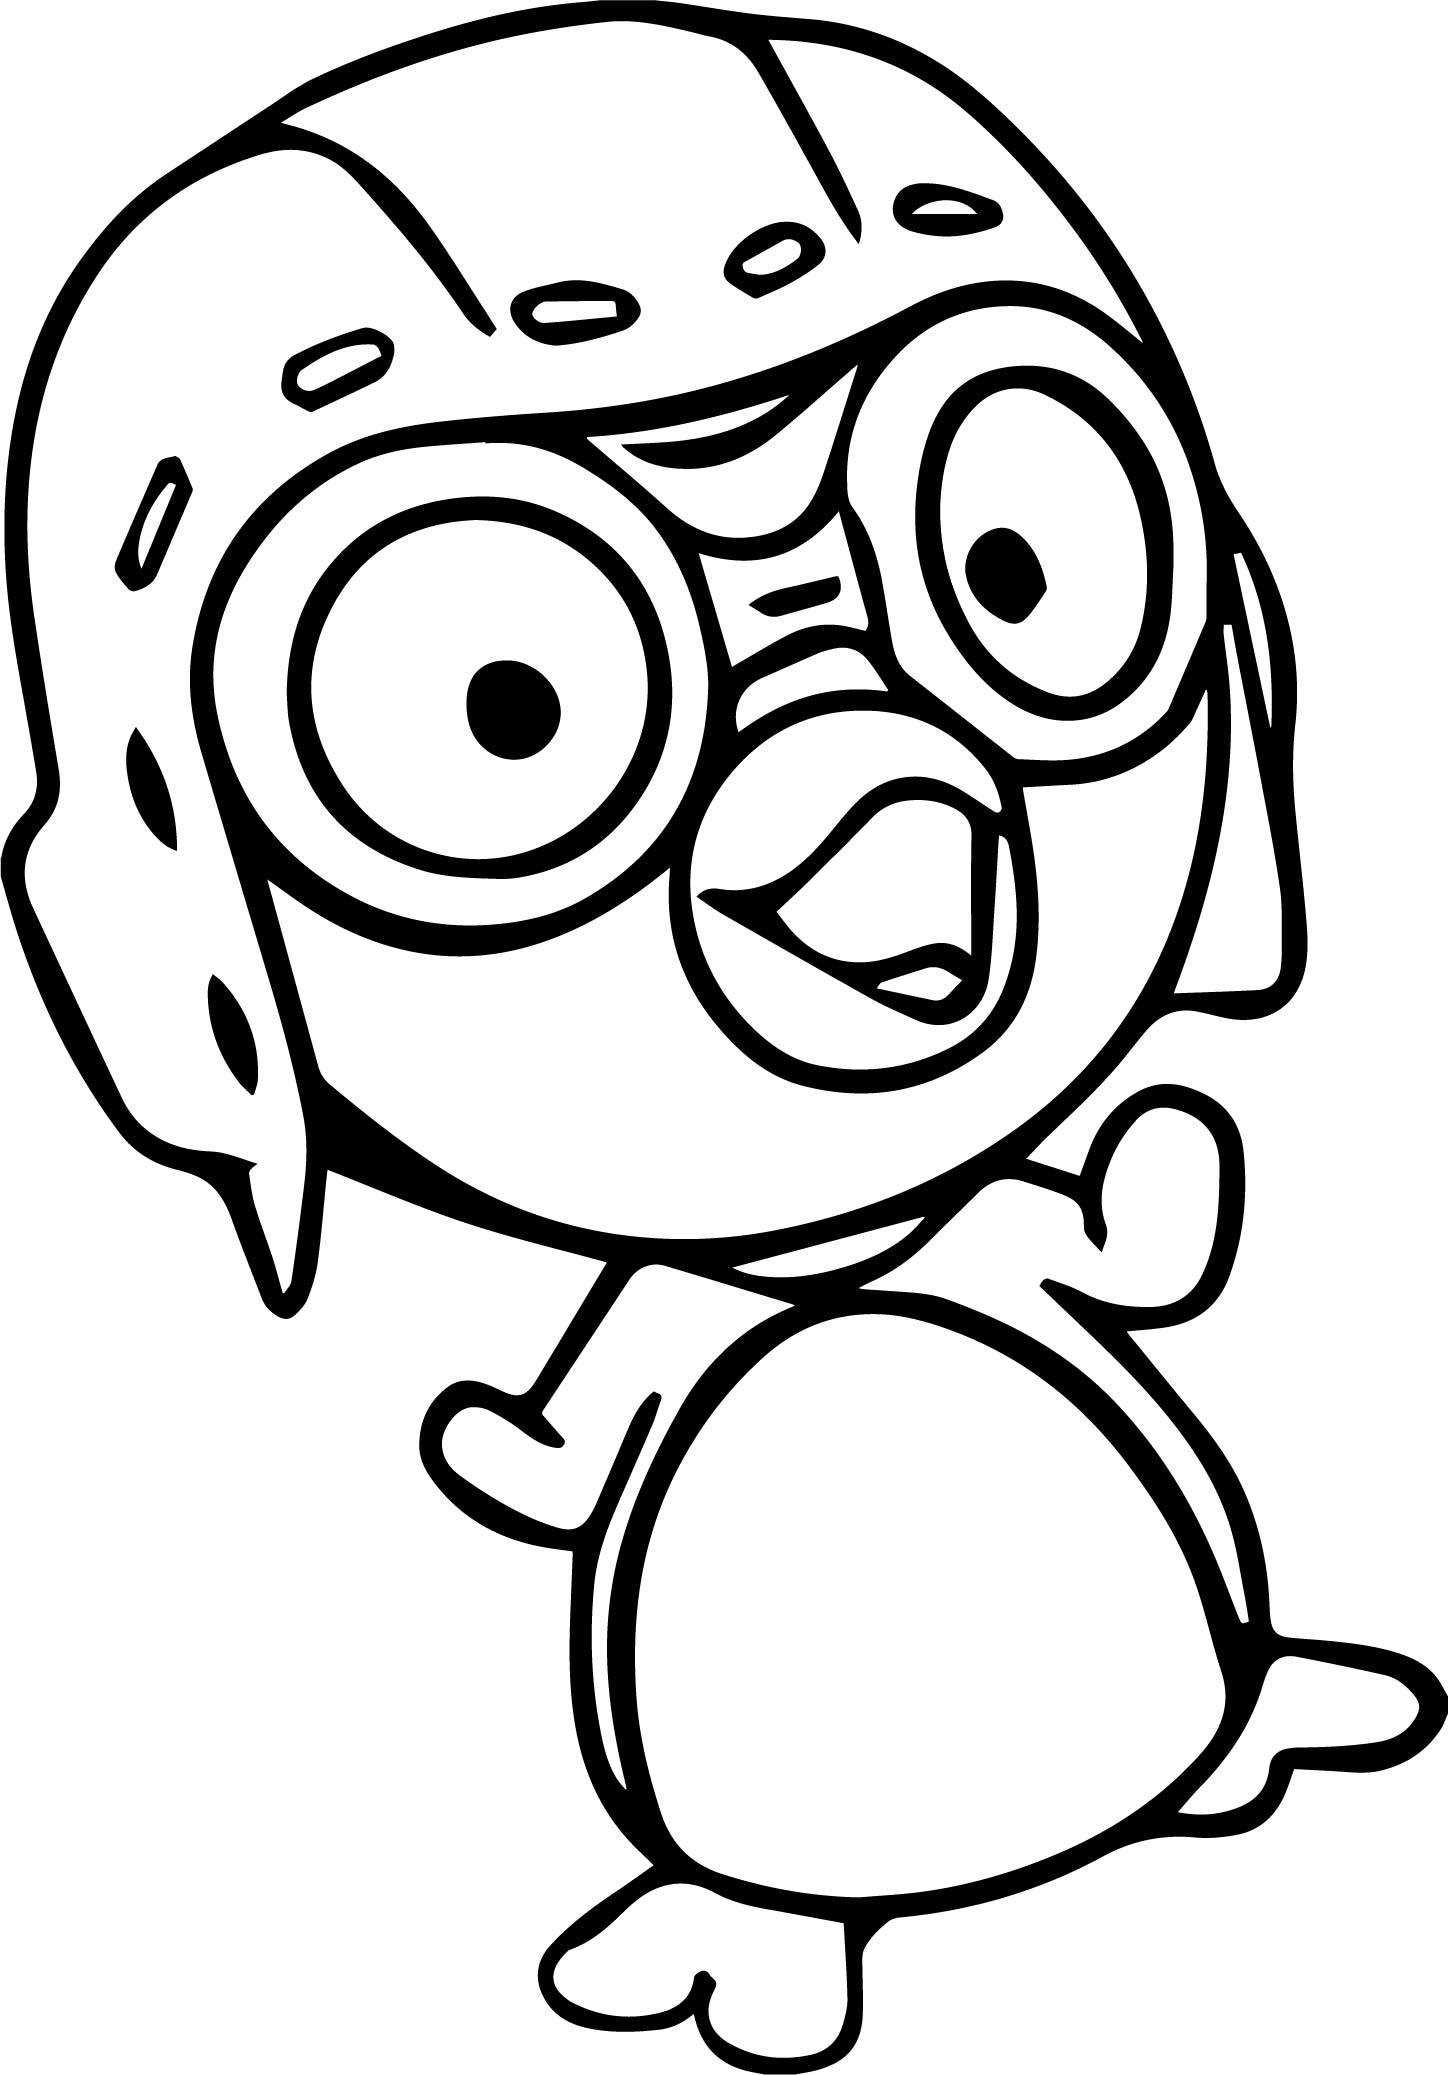 Pororo Coloring Pages at GetColorings.com | Free printable colorings